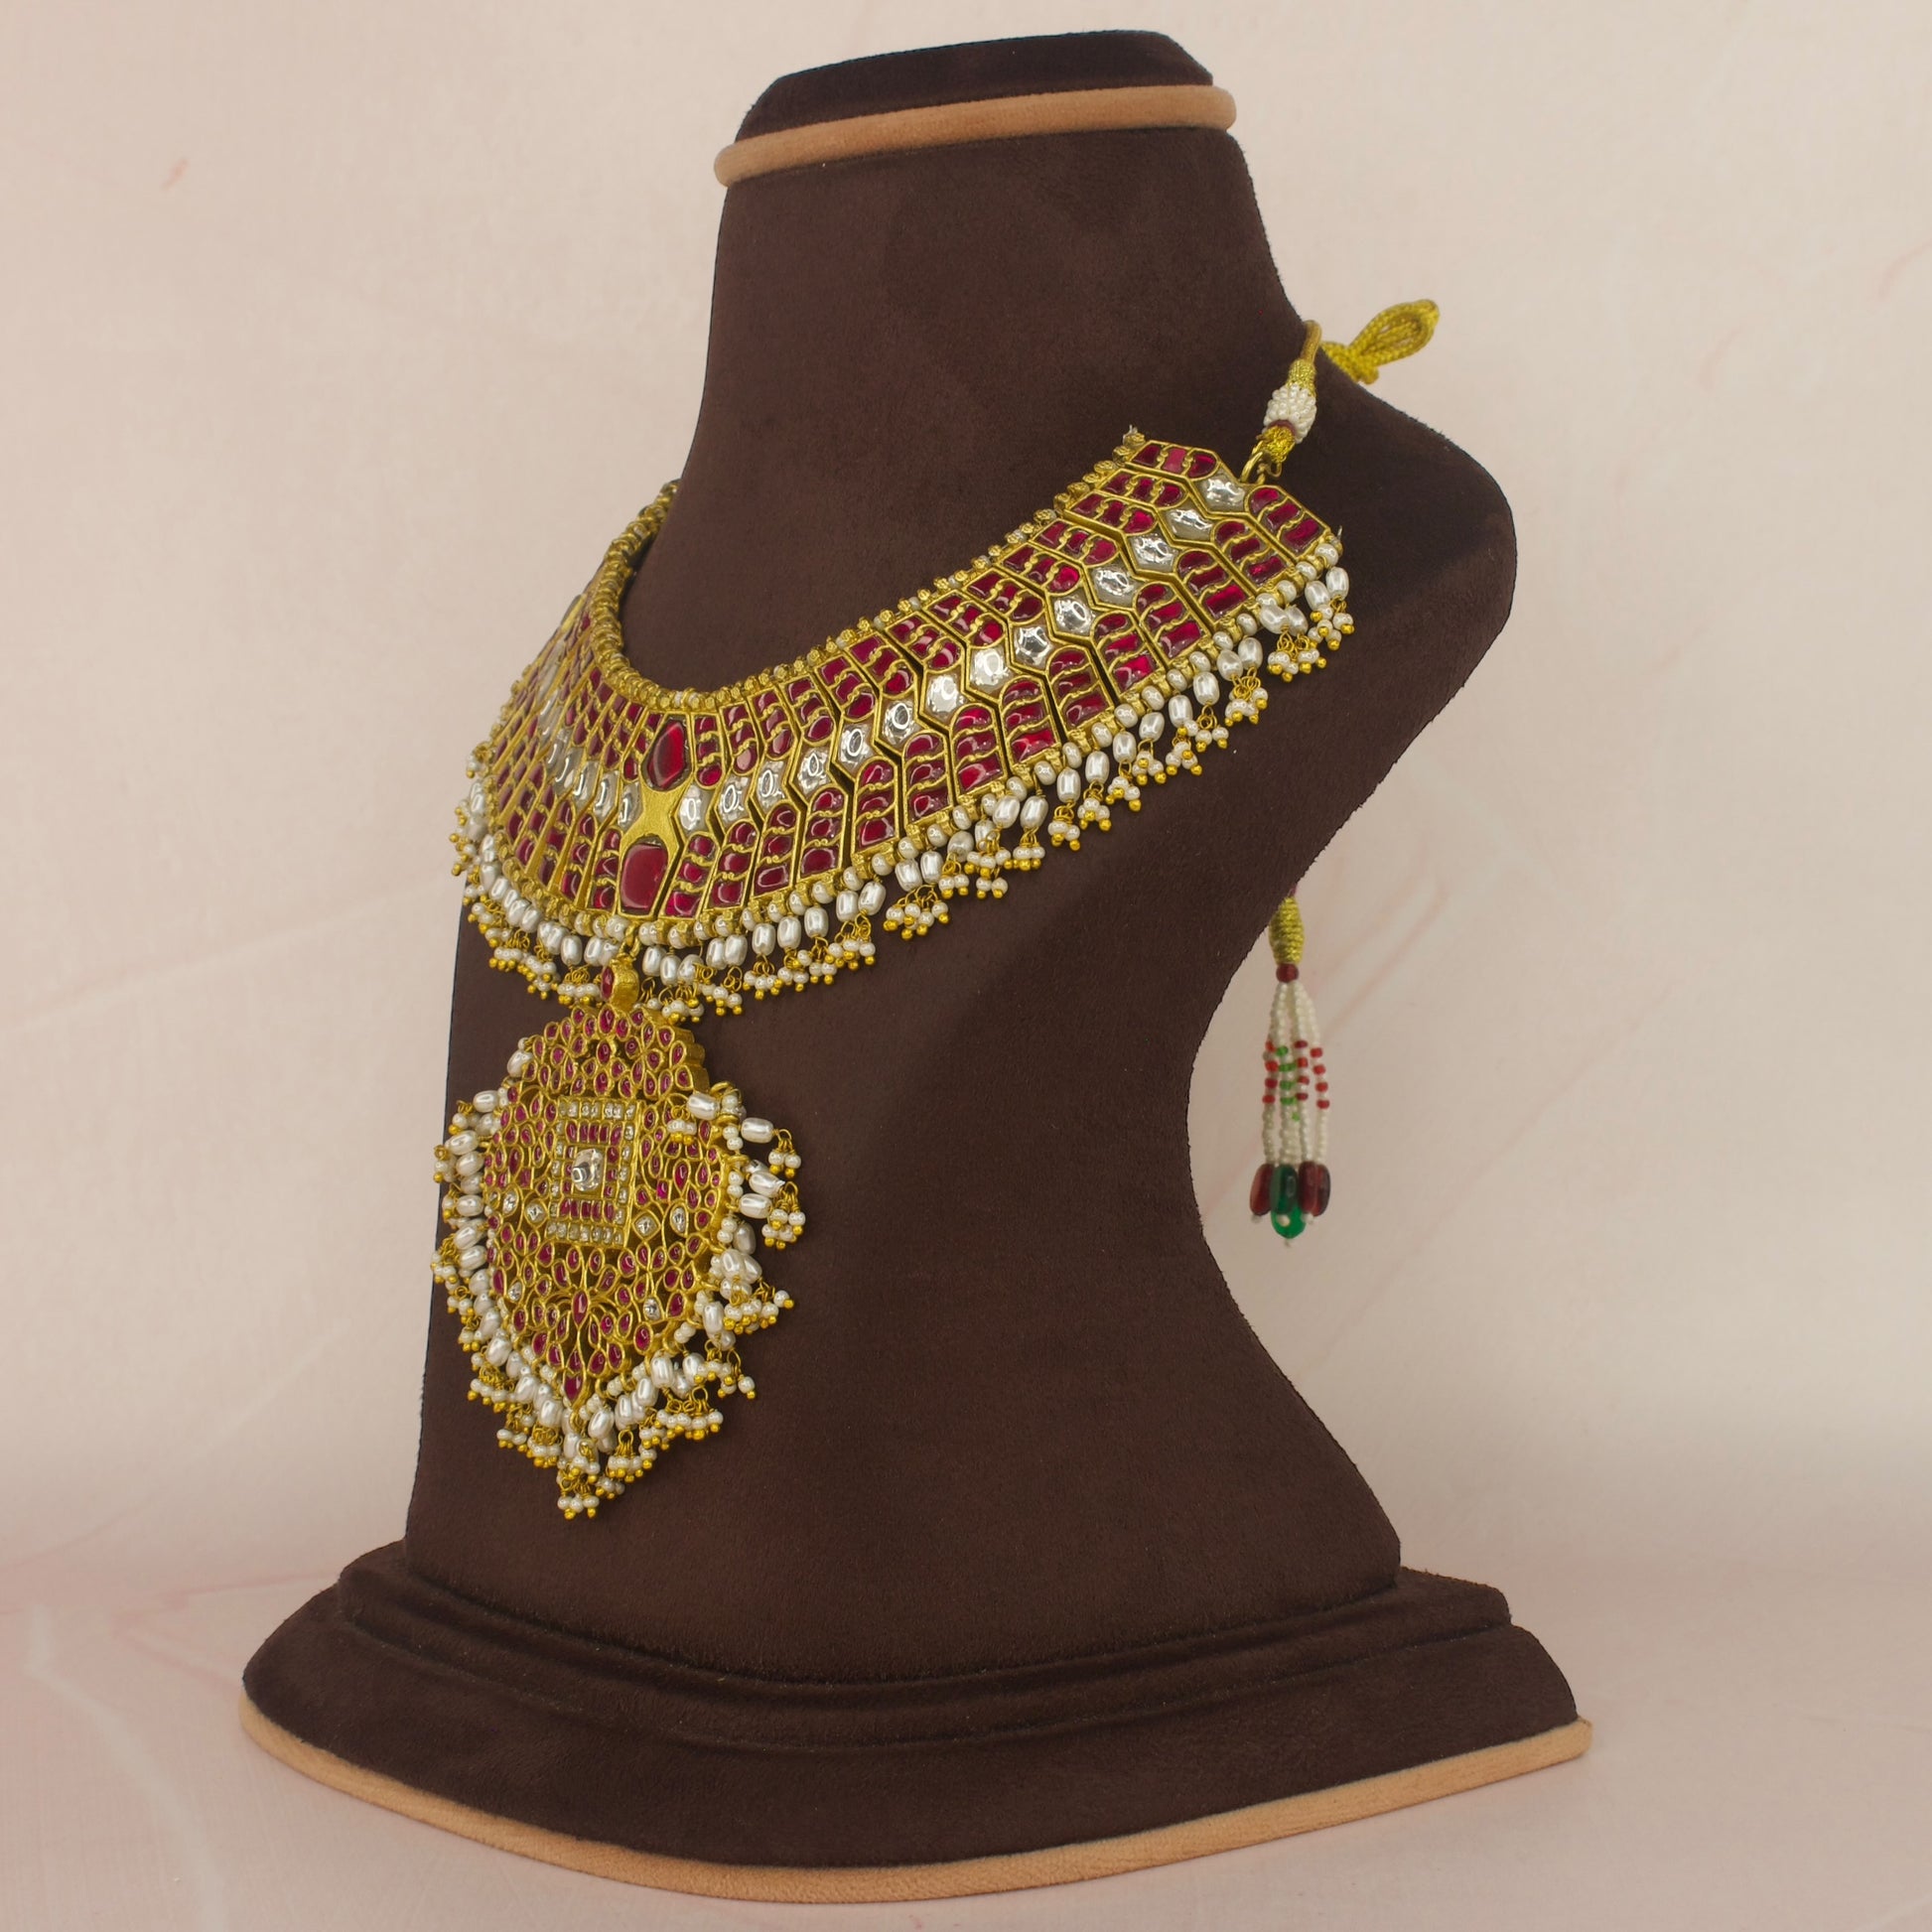 This is Jadau Kundan Short Necklace with red and white Kundan stones. This piece is covered in 22k Gold plating and at the bottom of this piece there are Ricepearls 